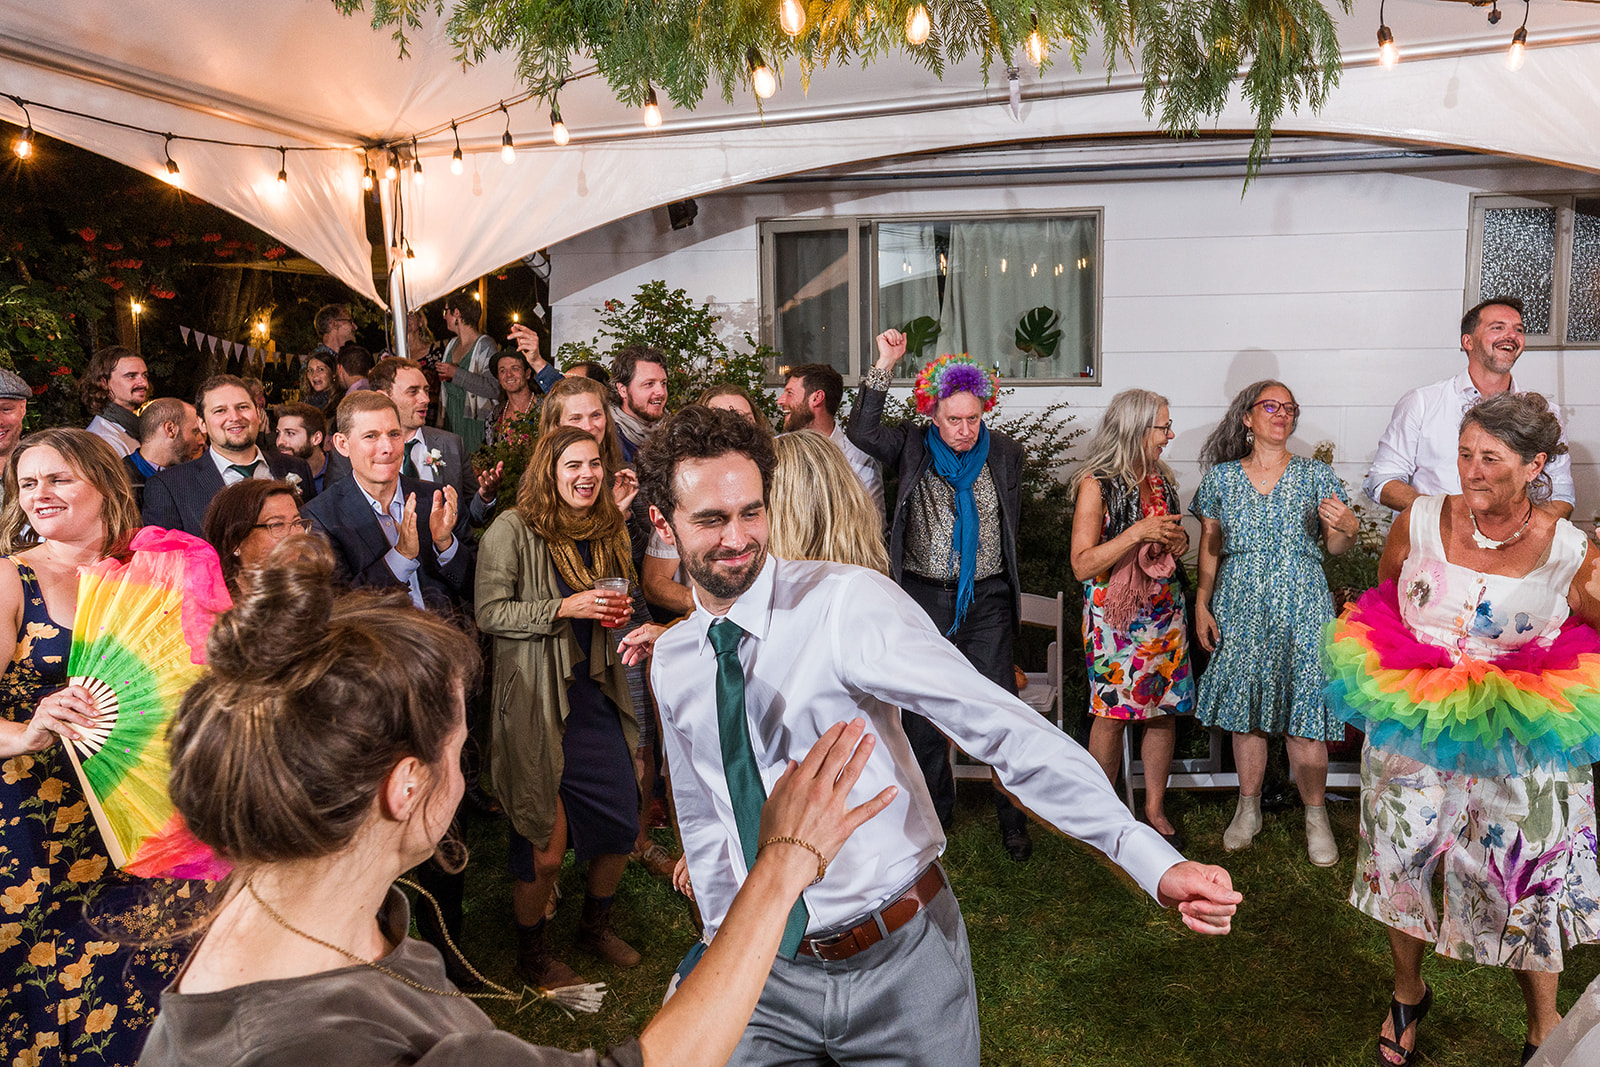 late night dance party at their nelson bc backyard wedding documentary photography 2